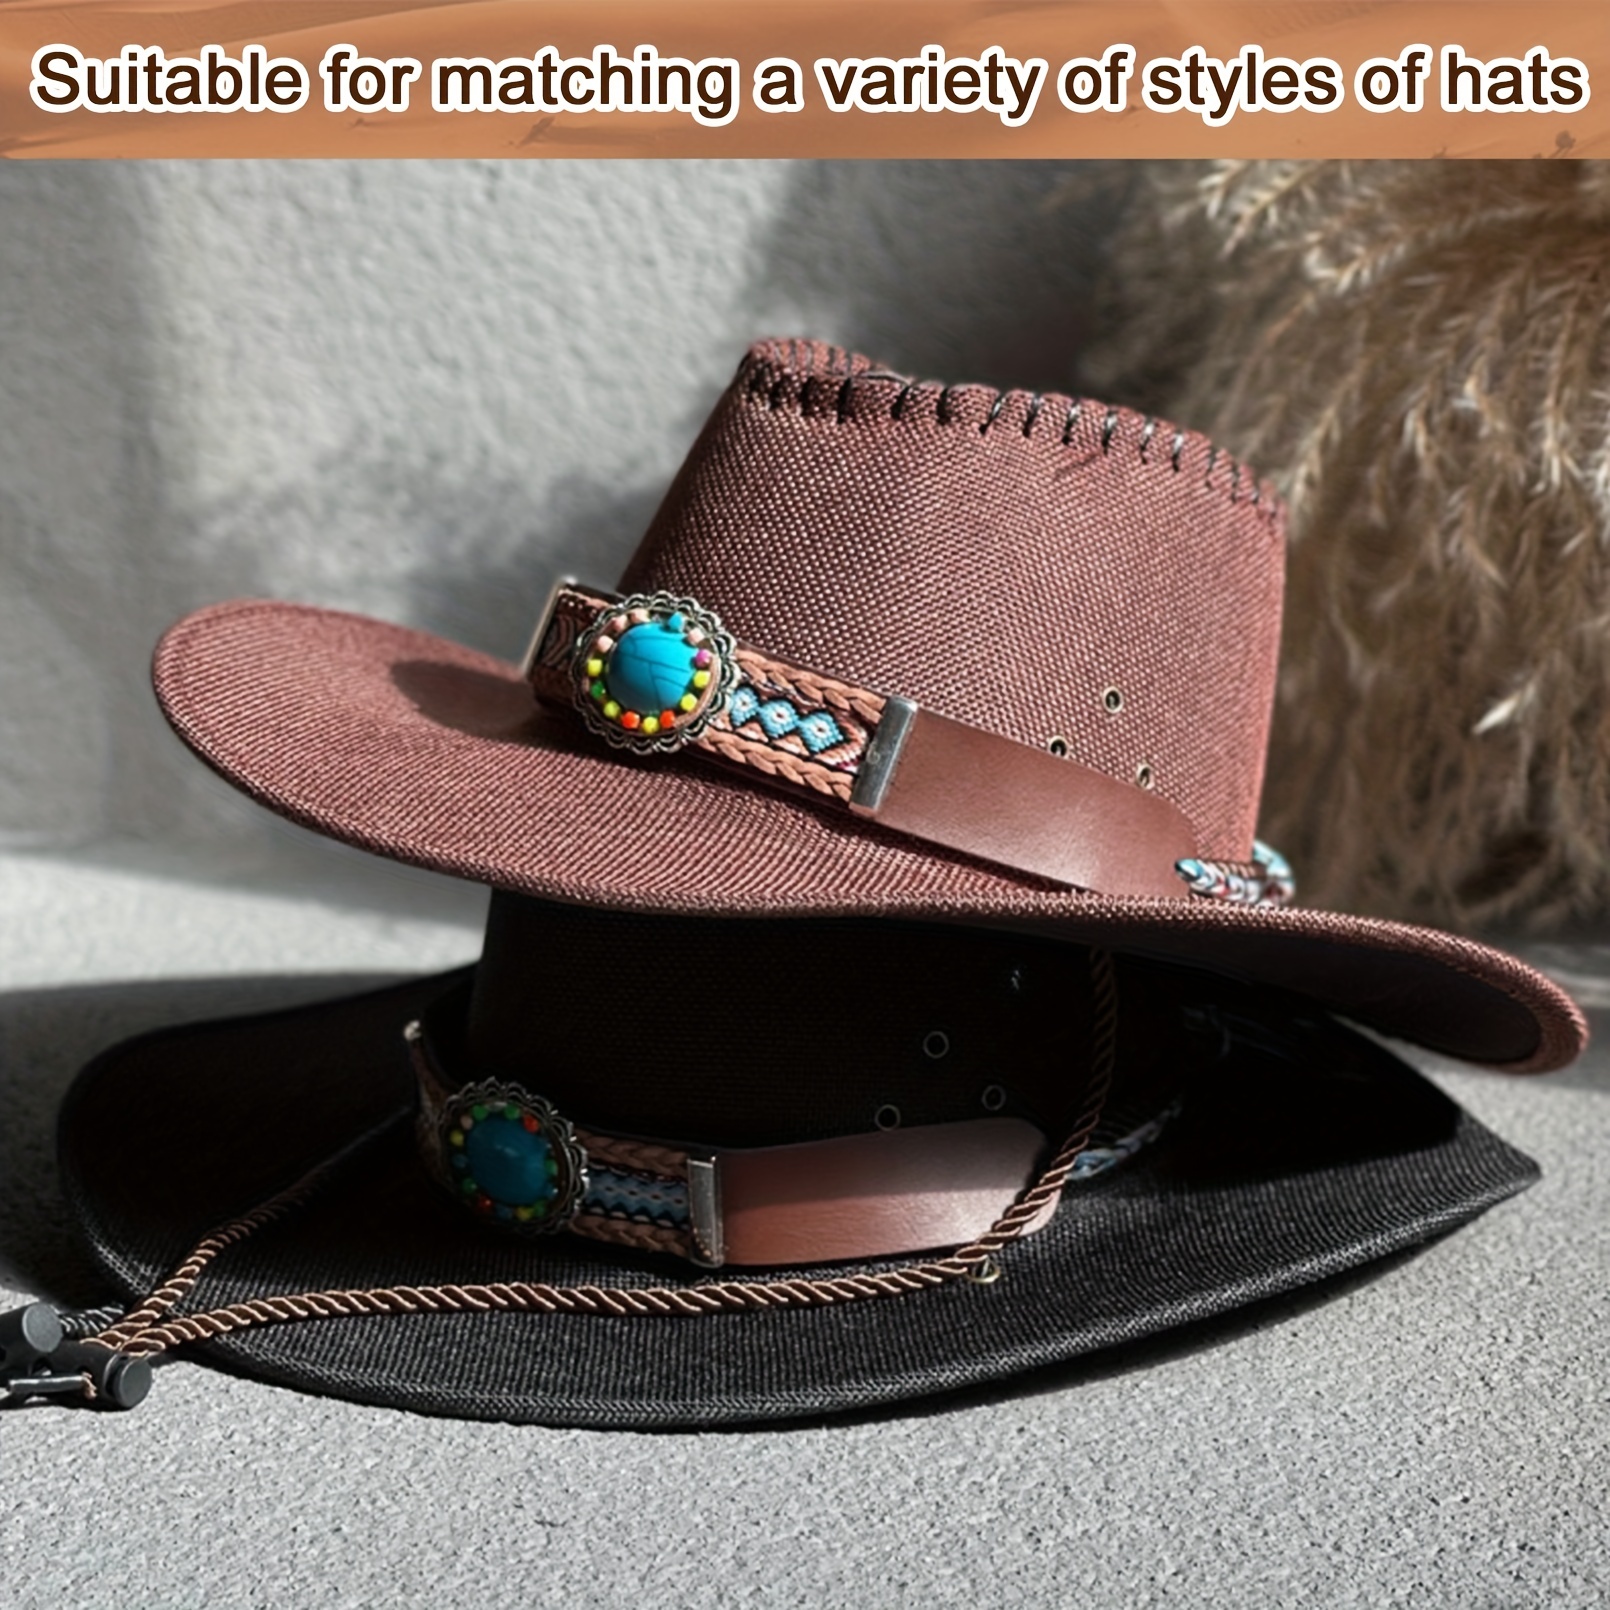 6 Pcs Cowboy Hat Band Replacement Ethnic Western Hat Belts Rural Classical Mexican Turquoise Hatbands for Fedora